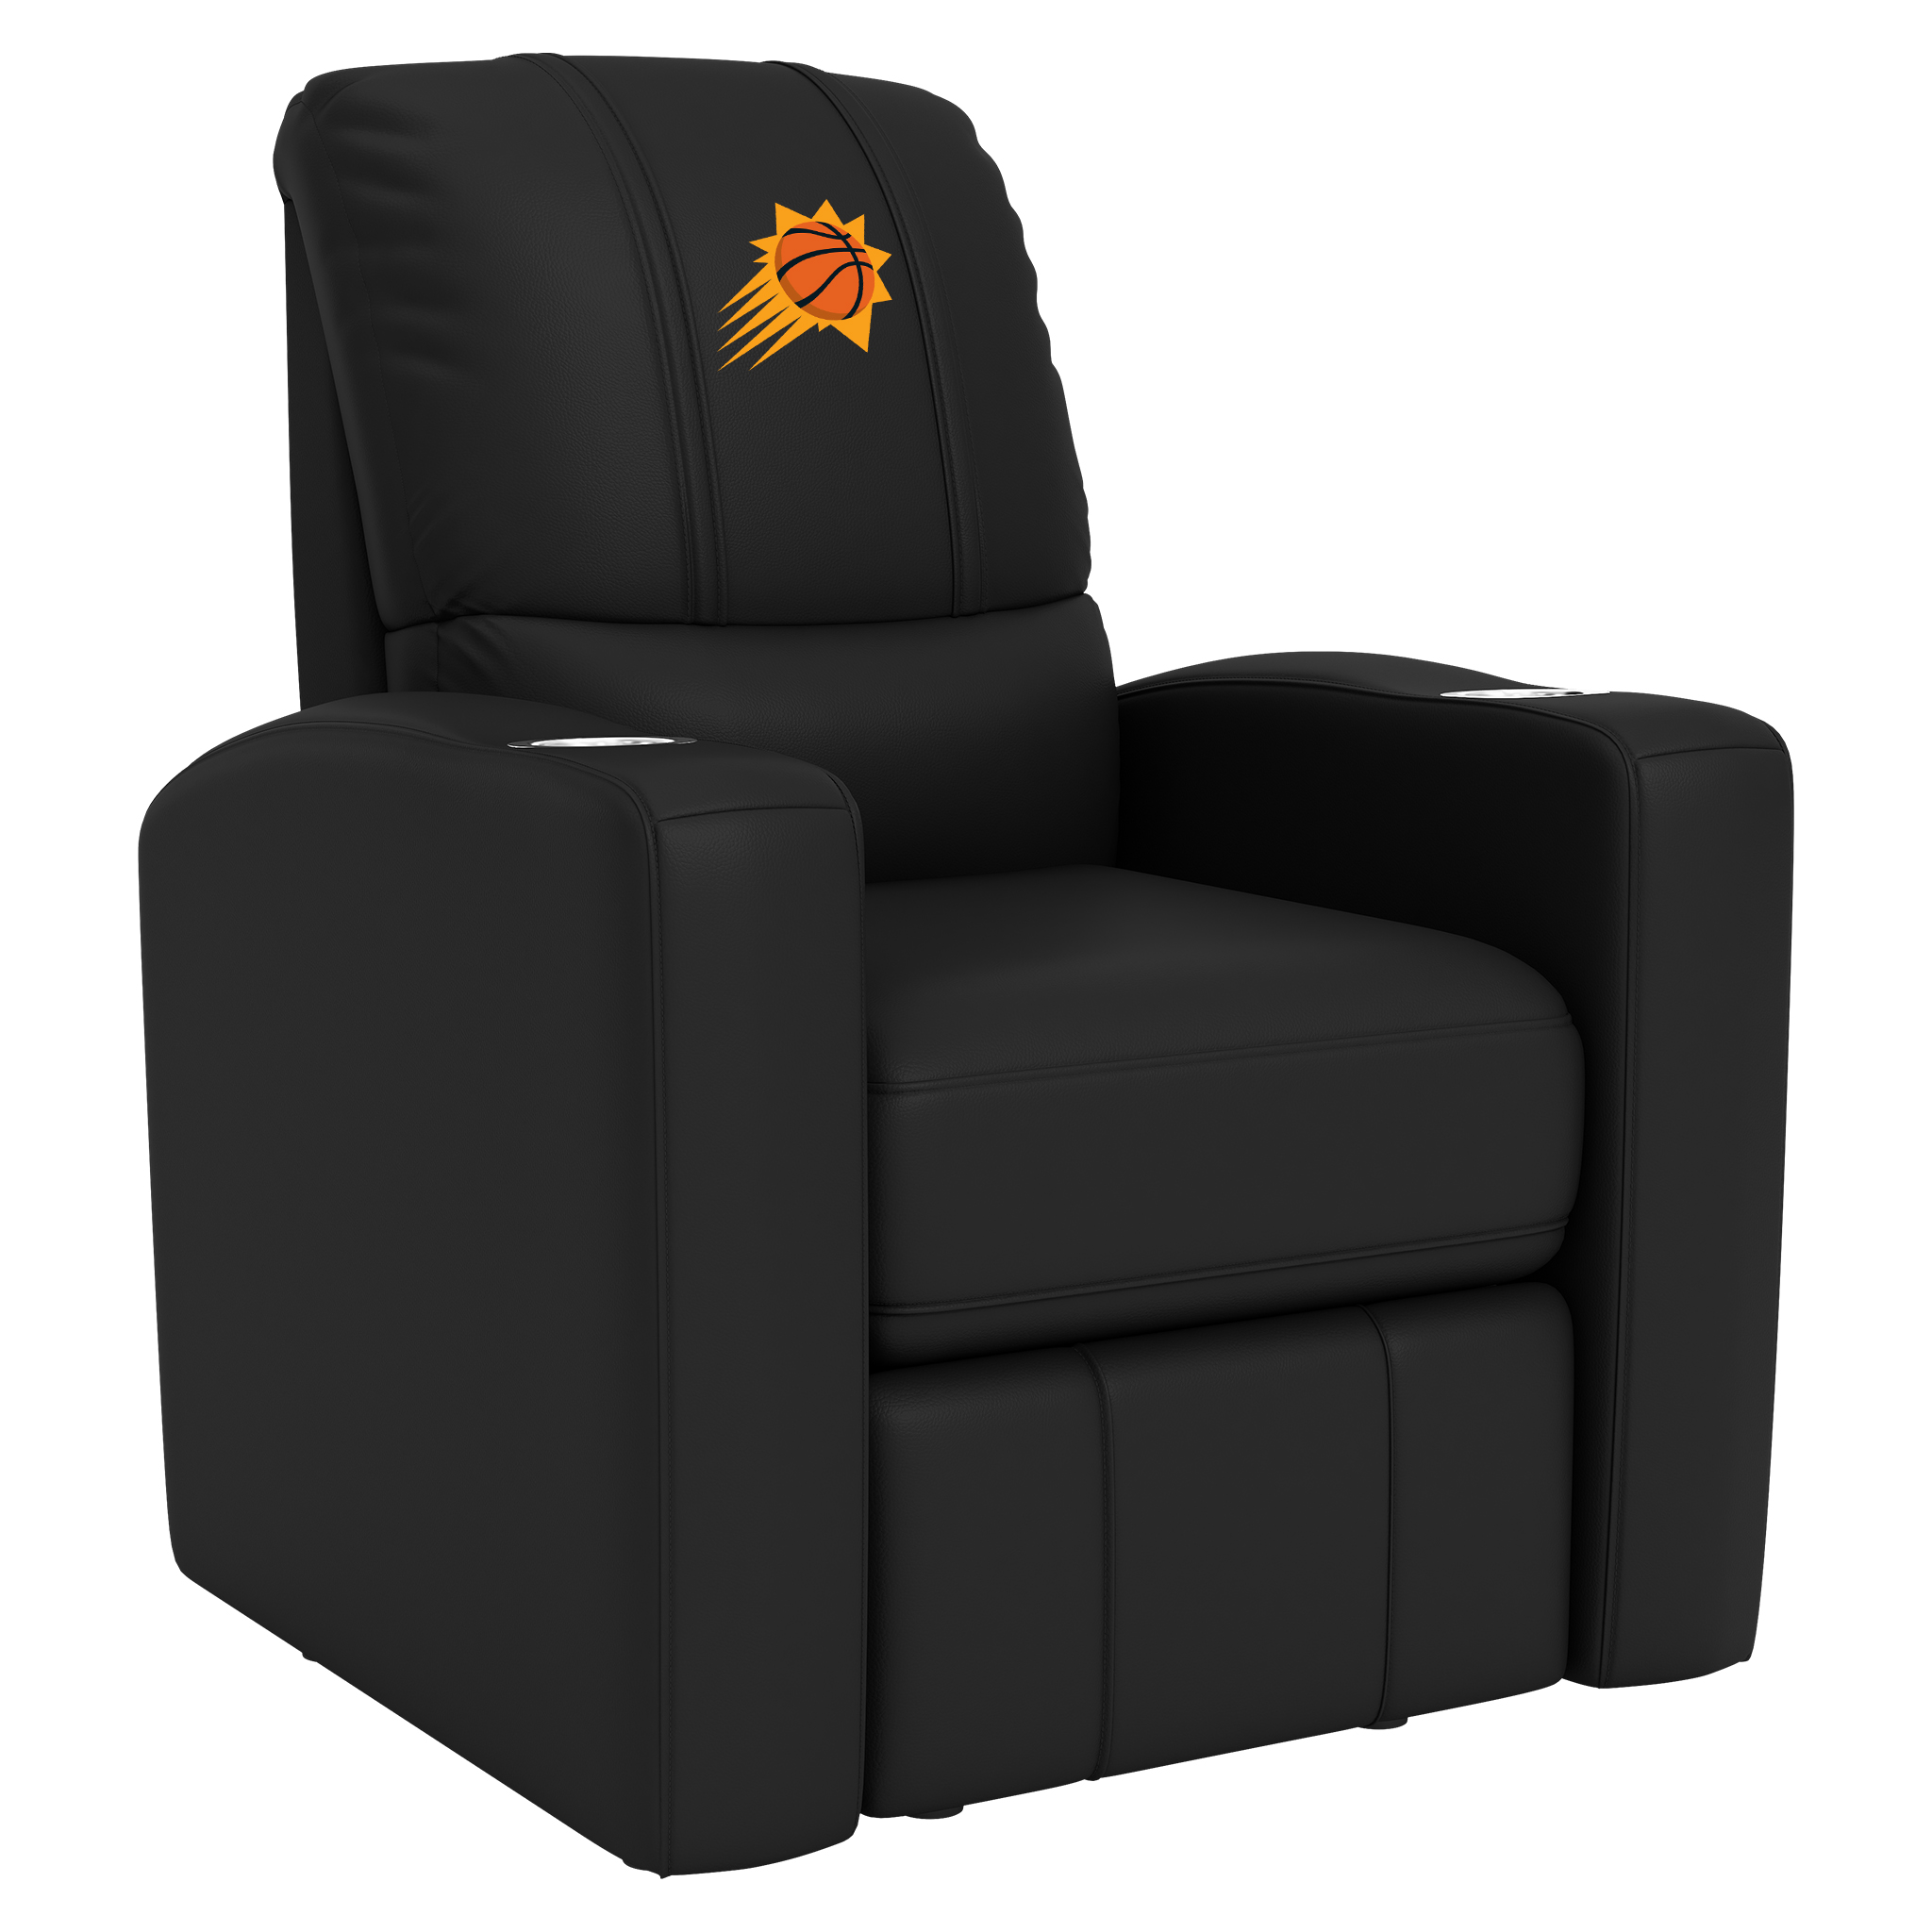 Phoenix Suns Stealth Recliner with Phoenix Suns Primary